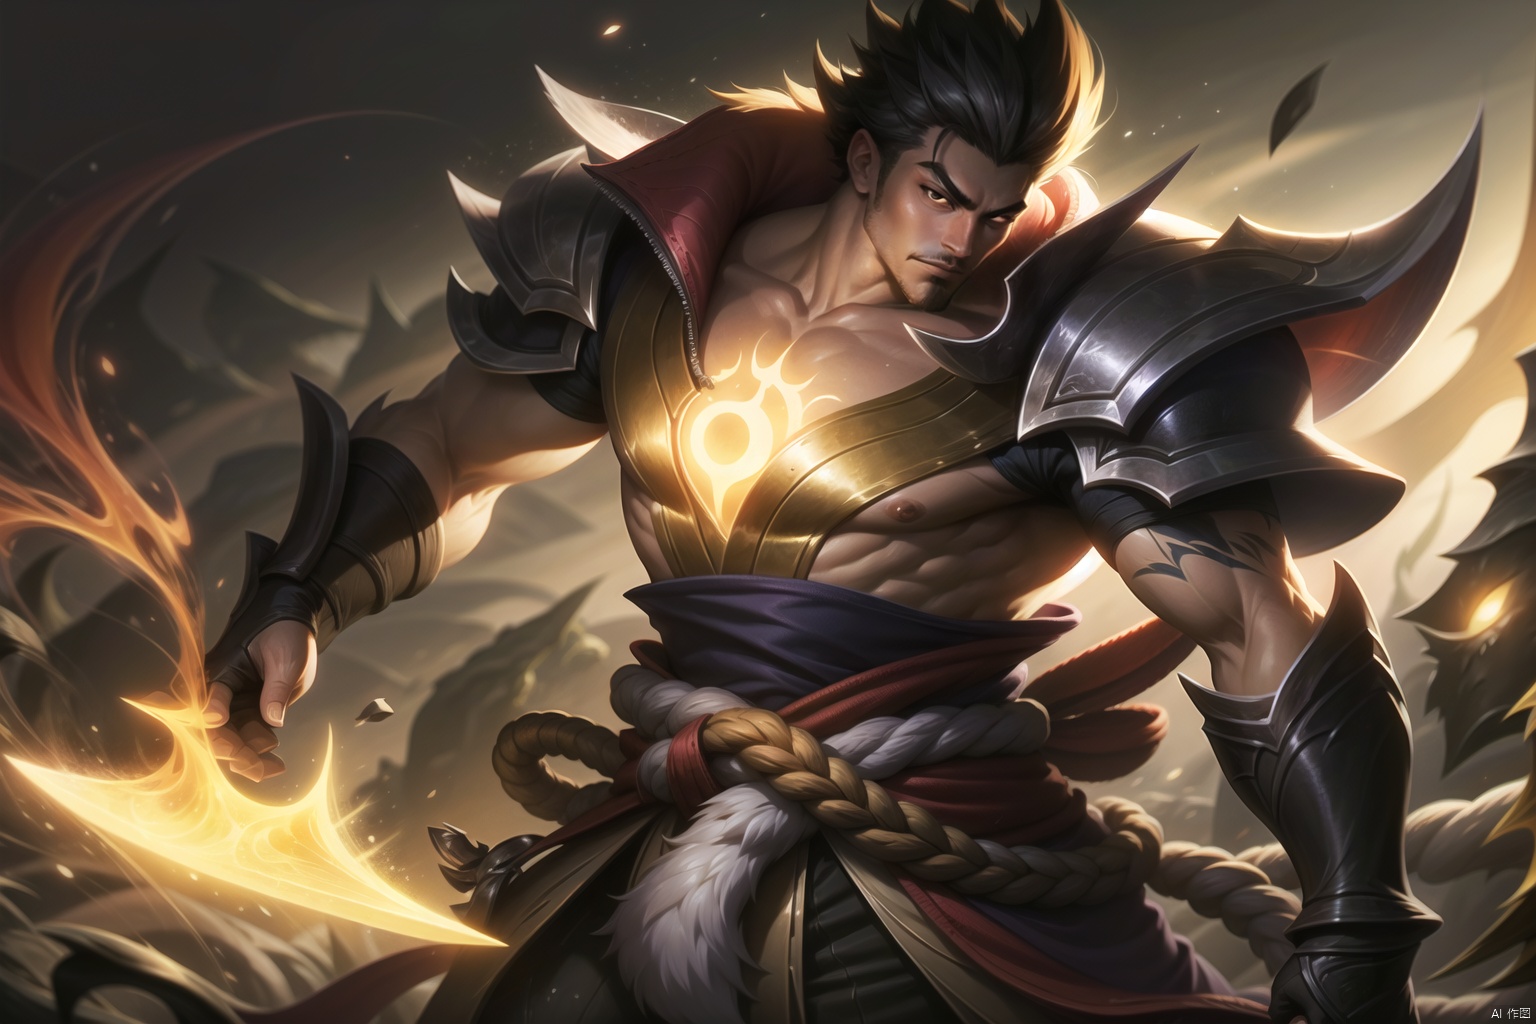  The heroic character in "League of Legends", he wears warrior armor, exudes a green aura, and holds a big knife in his hand. A close-up of a character, this painting adopts the fantasy art style of "League of Legends" illustrations. --ar 128:85, Darius, songoku,black monkey king,uchiha sasuke